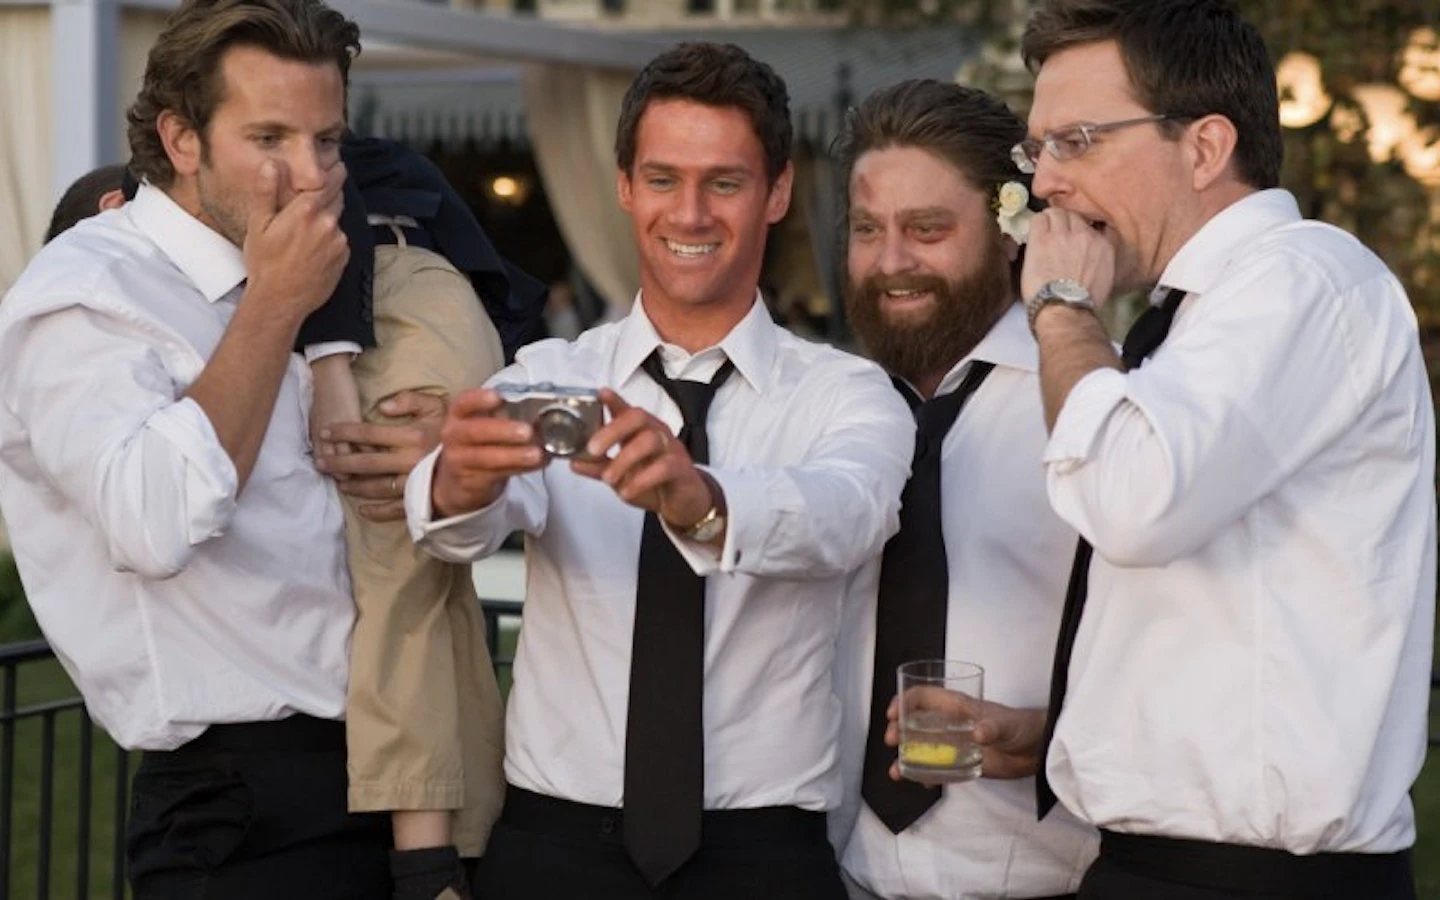 Bachelors watching photos from their bachelor trip in the Hangover 2 movie final scene